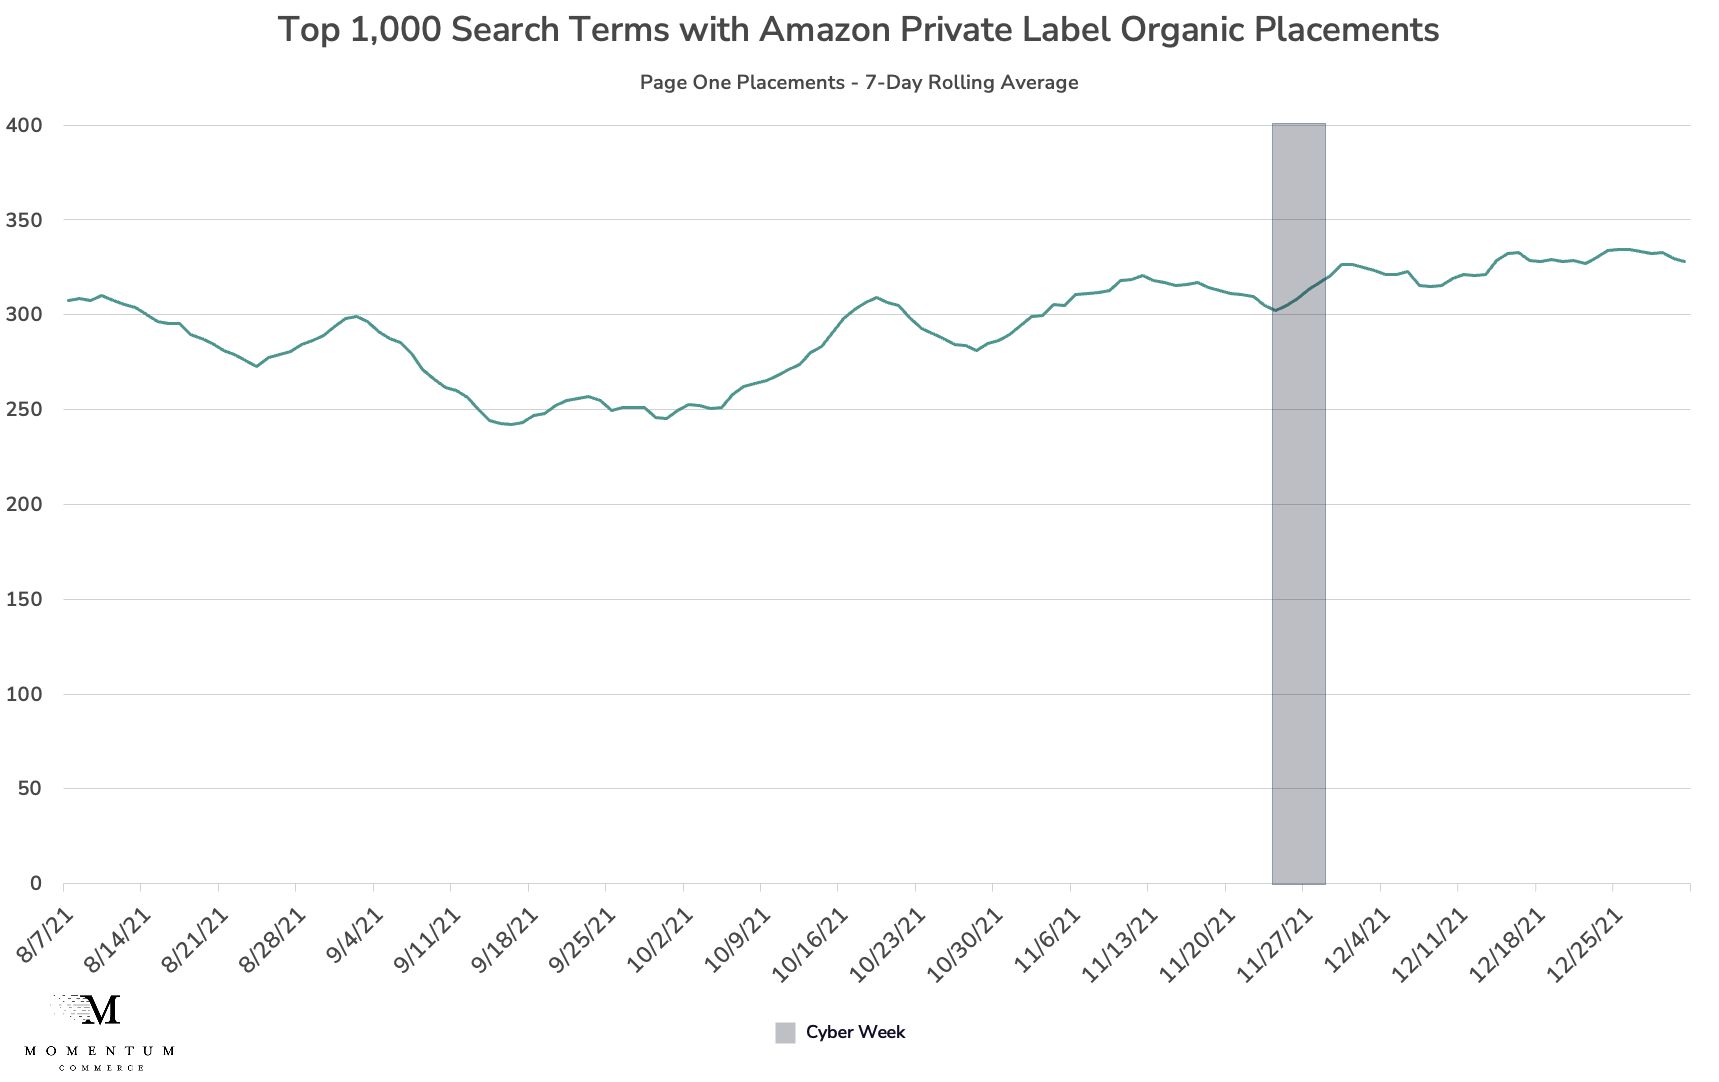 Top 1,000 Search Terms with Amazon Private Label Organic Placements